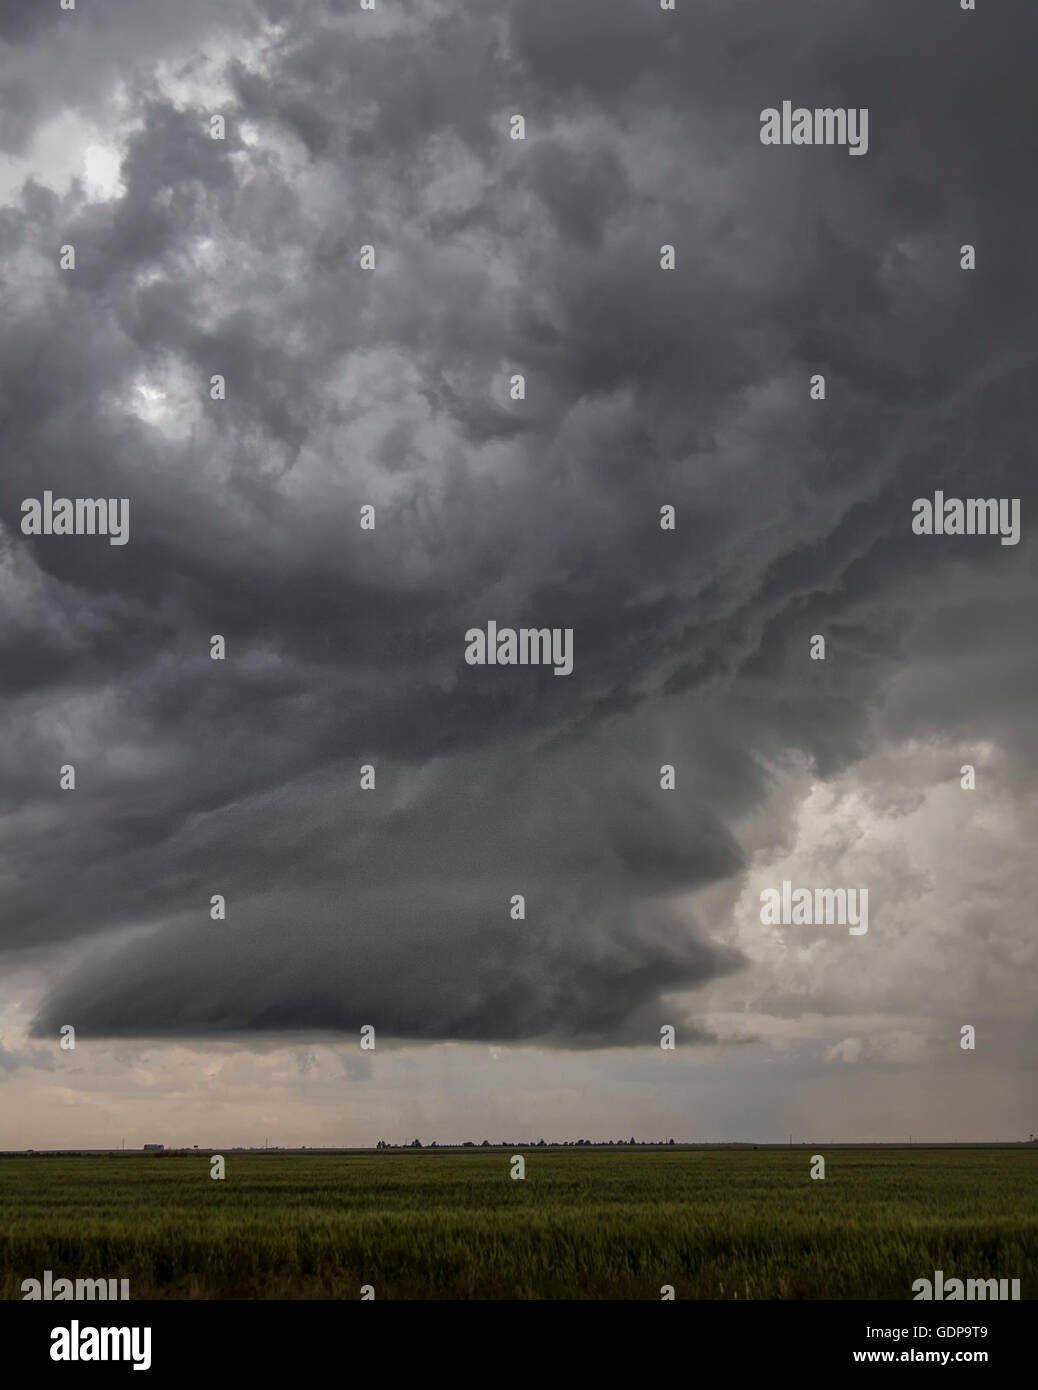 Supercell rotatif clouds over field Banque D'Images